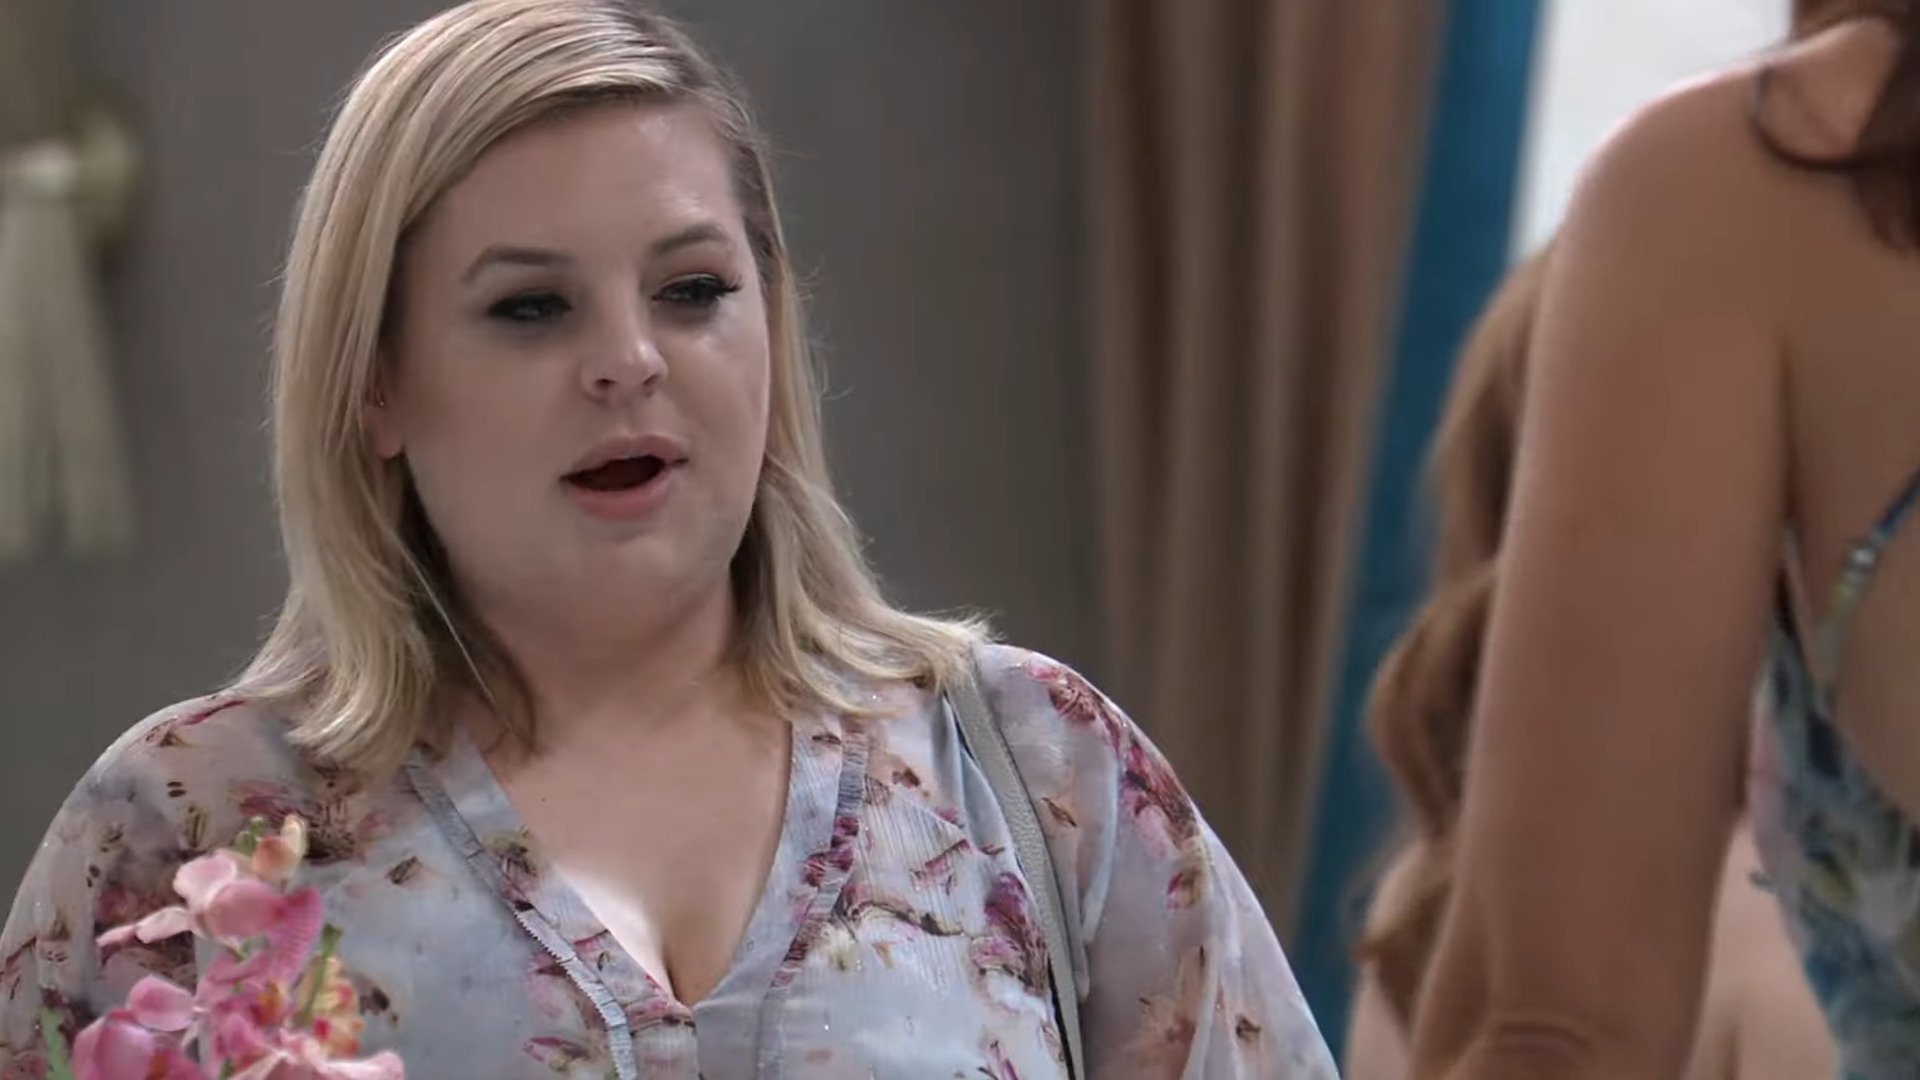 maxie asks what problem is GH